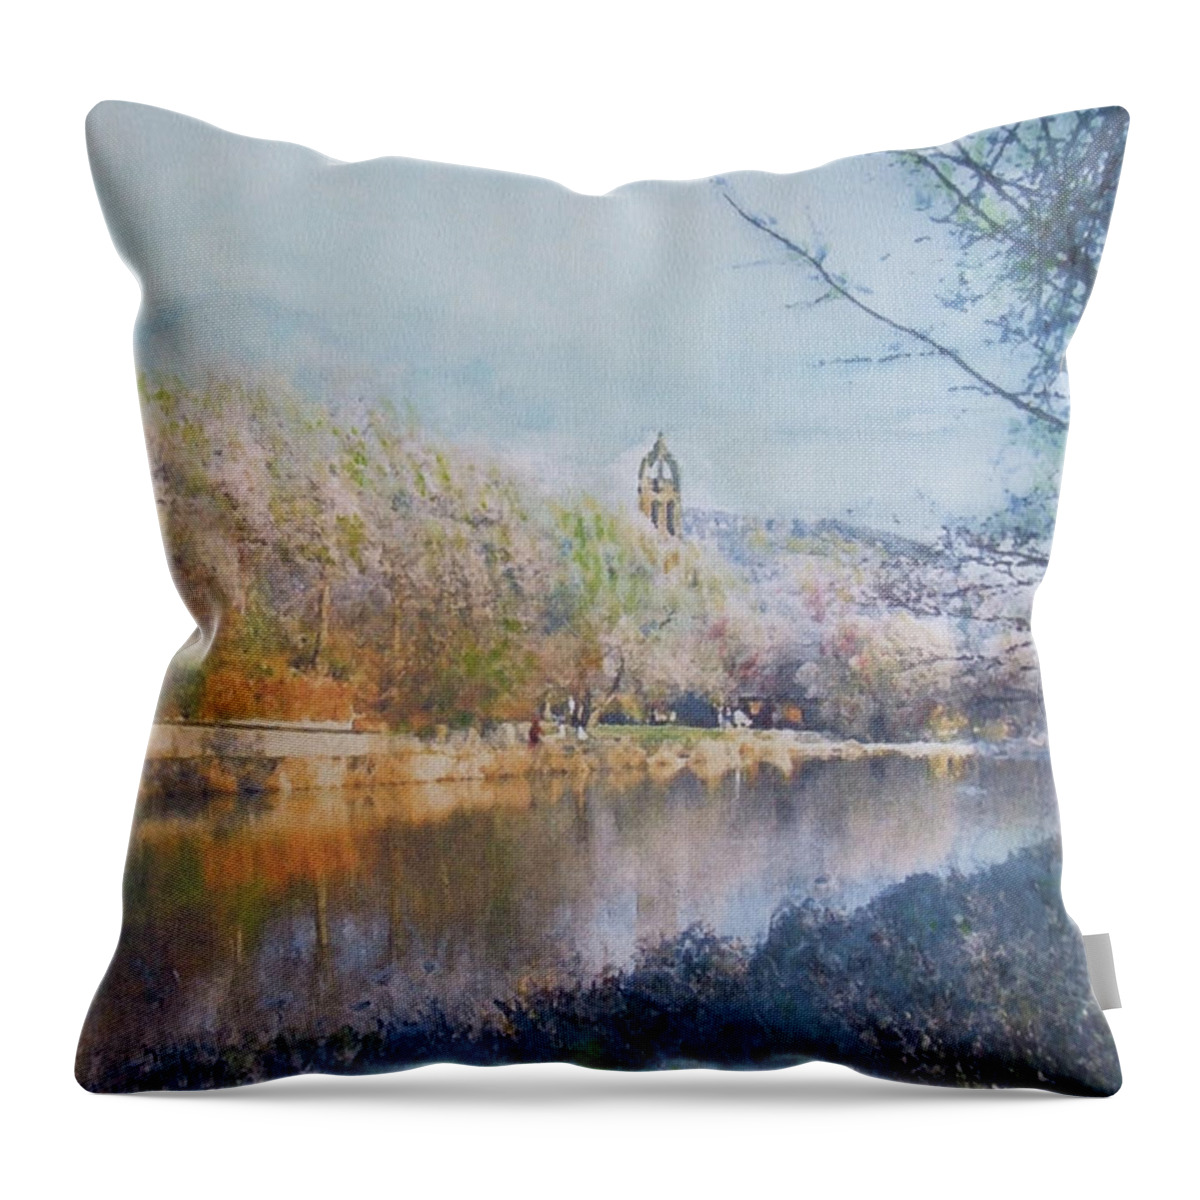 River Tweed Throw Pillow featuring the painting River walk reflections Peebles by Richard James Digance